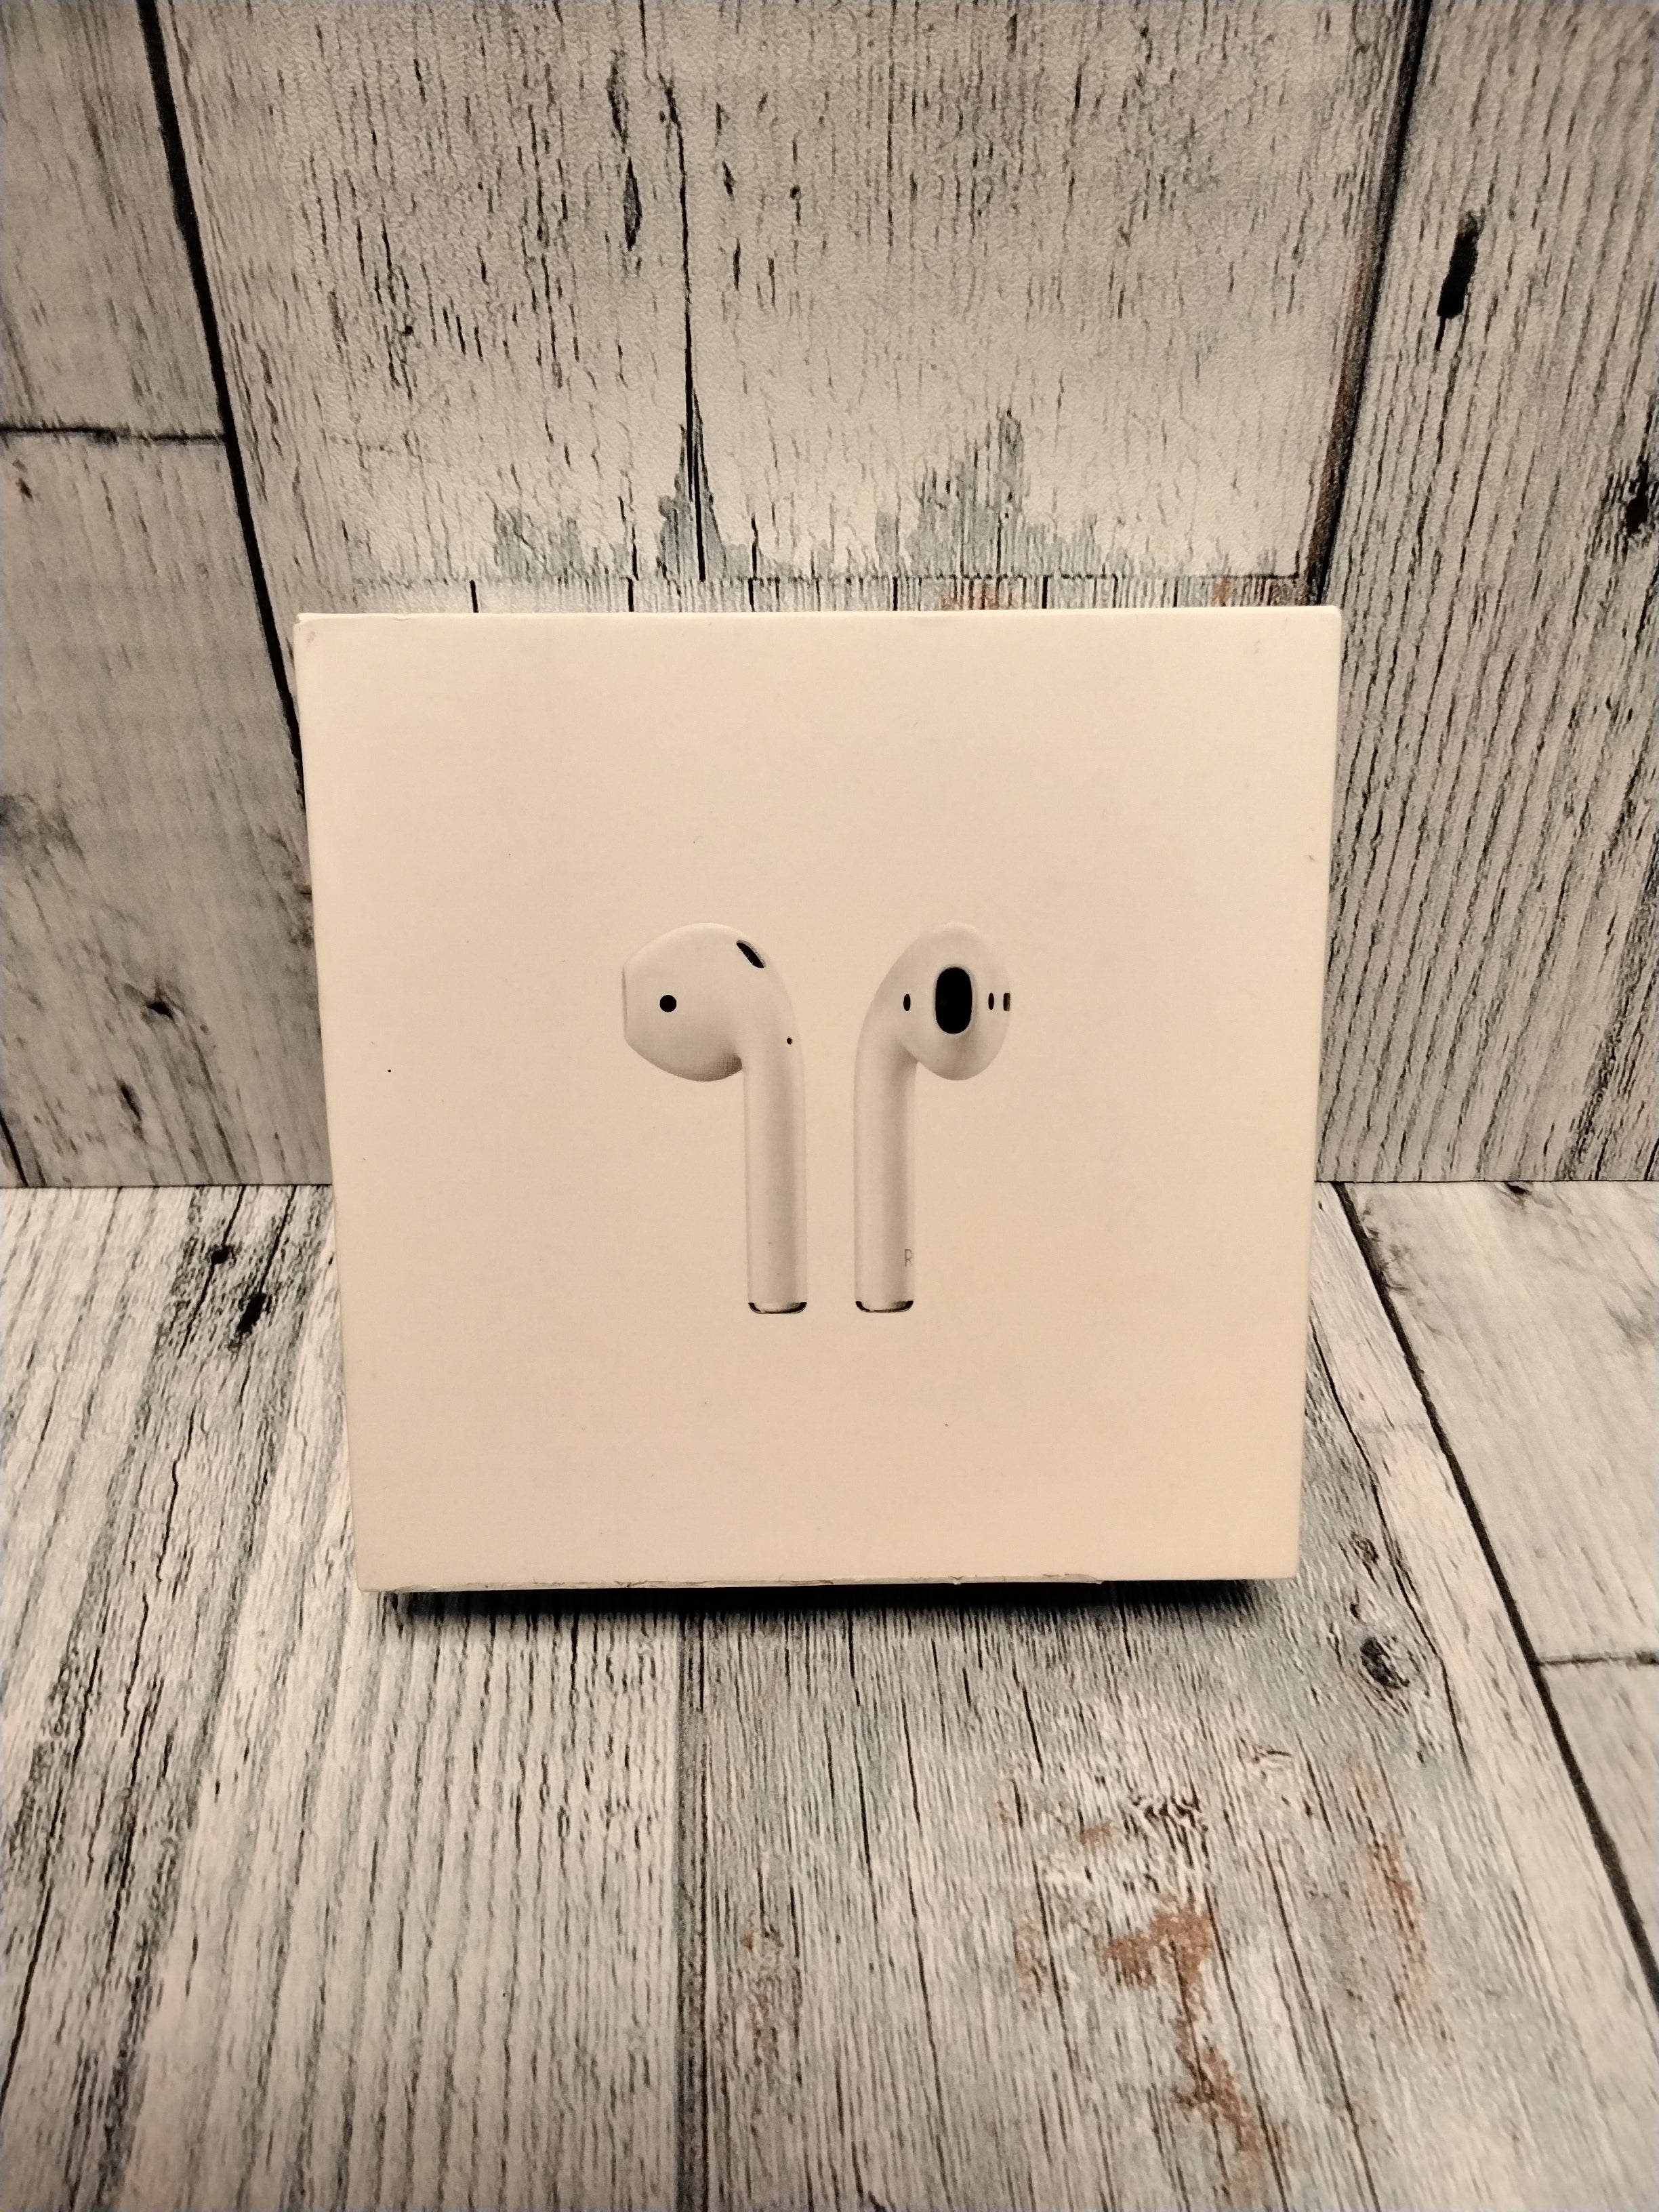 Apple AirPods (2nd Generation) *Tested* (7774241980654)